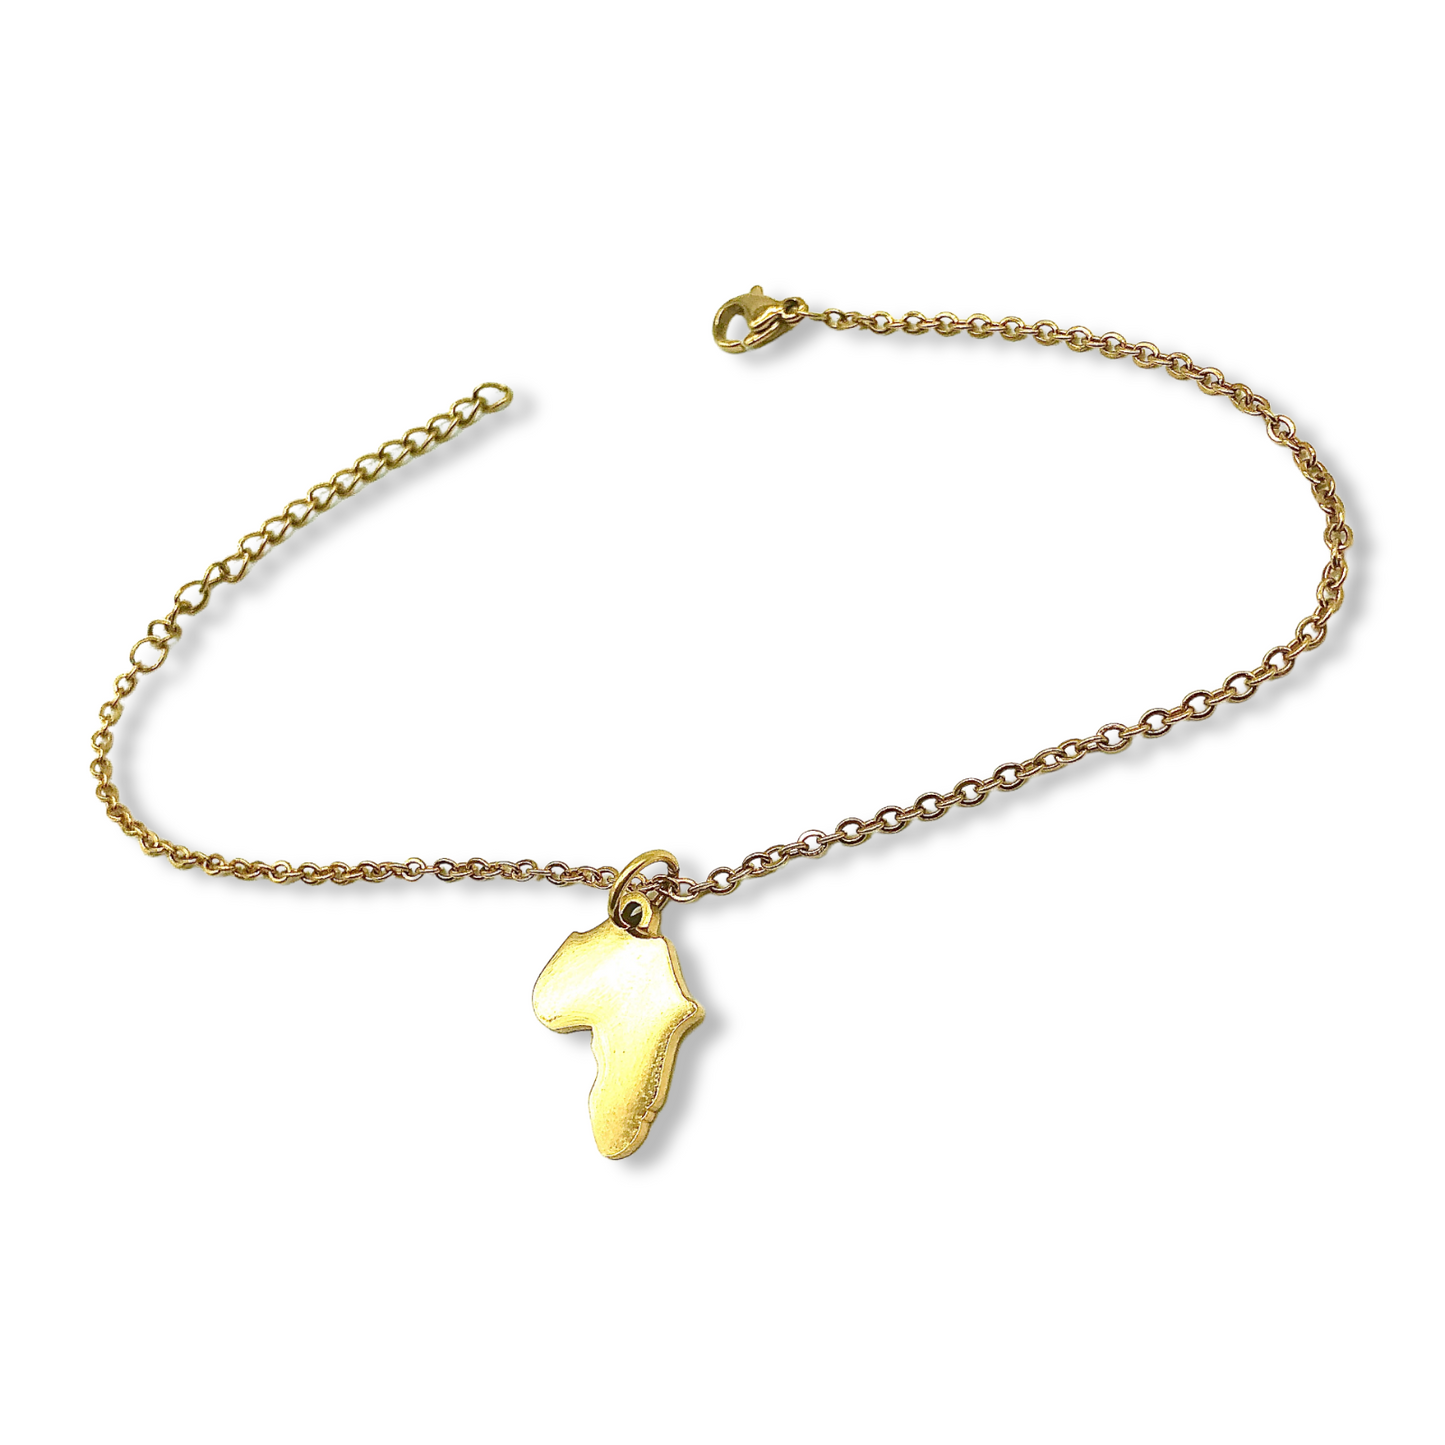 New! 18K "One Africa" Continent Anklet